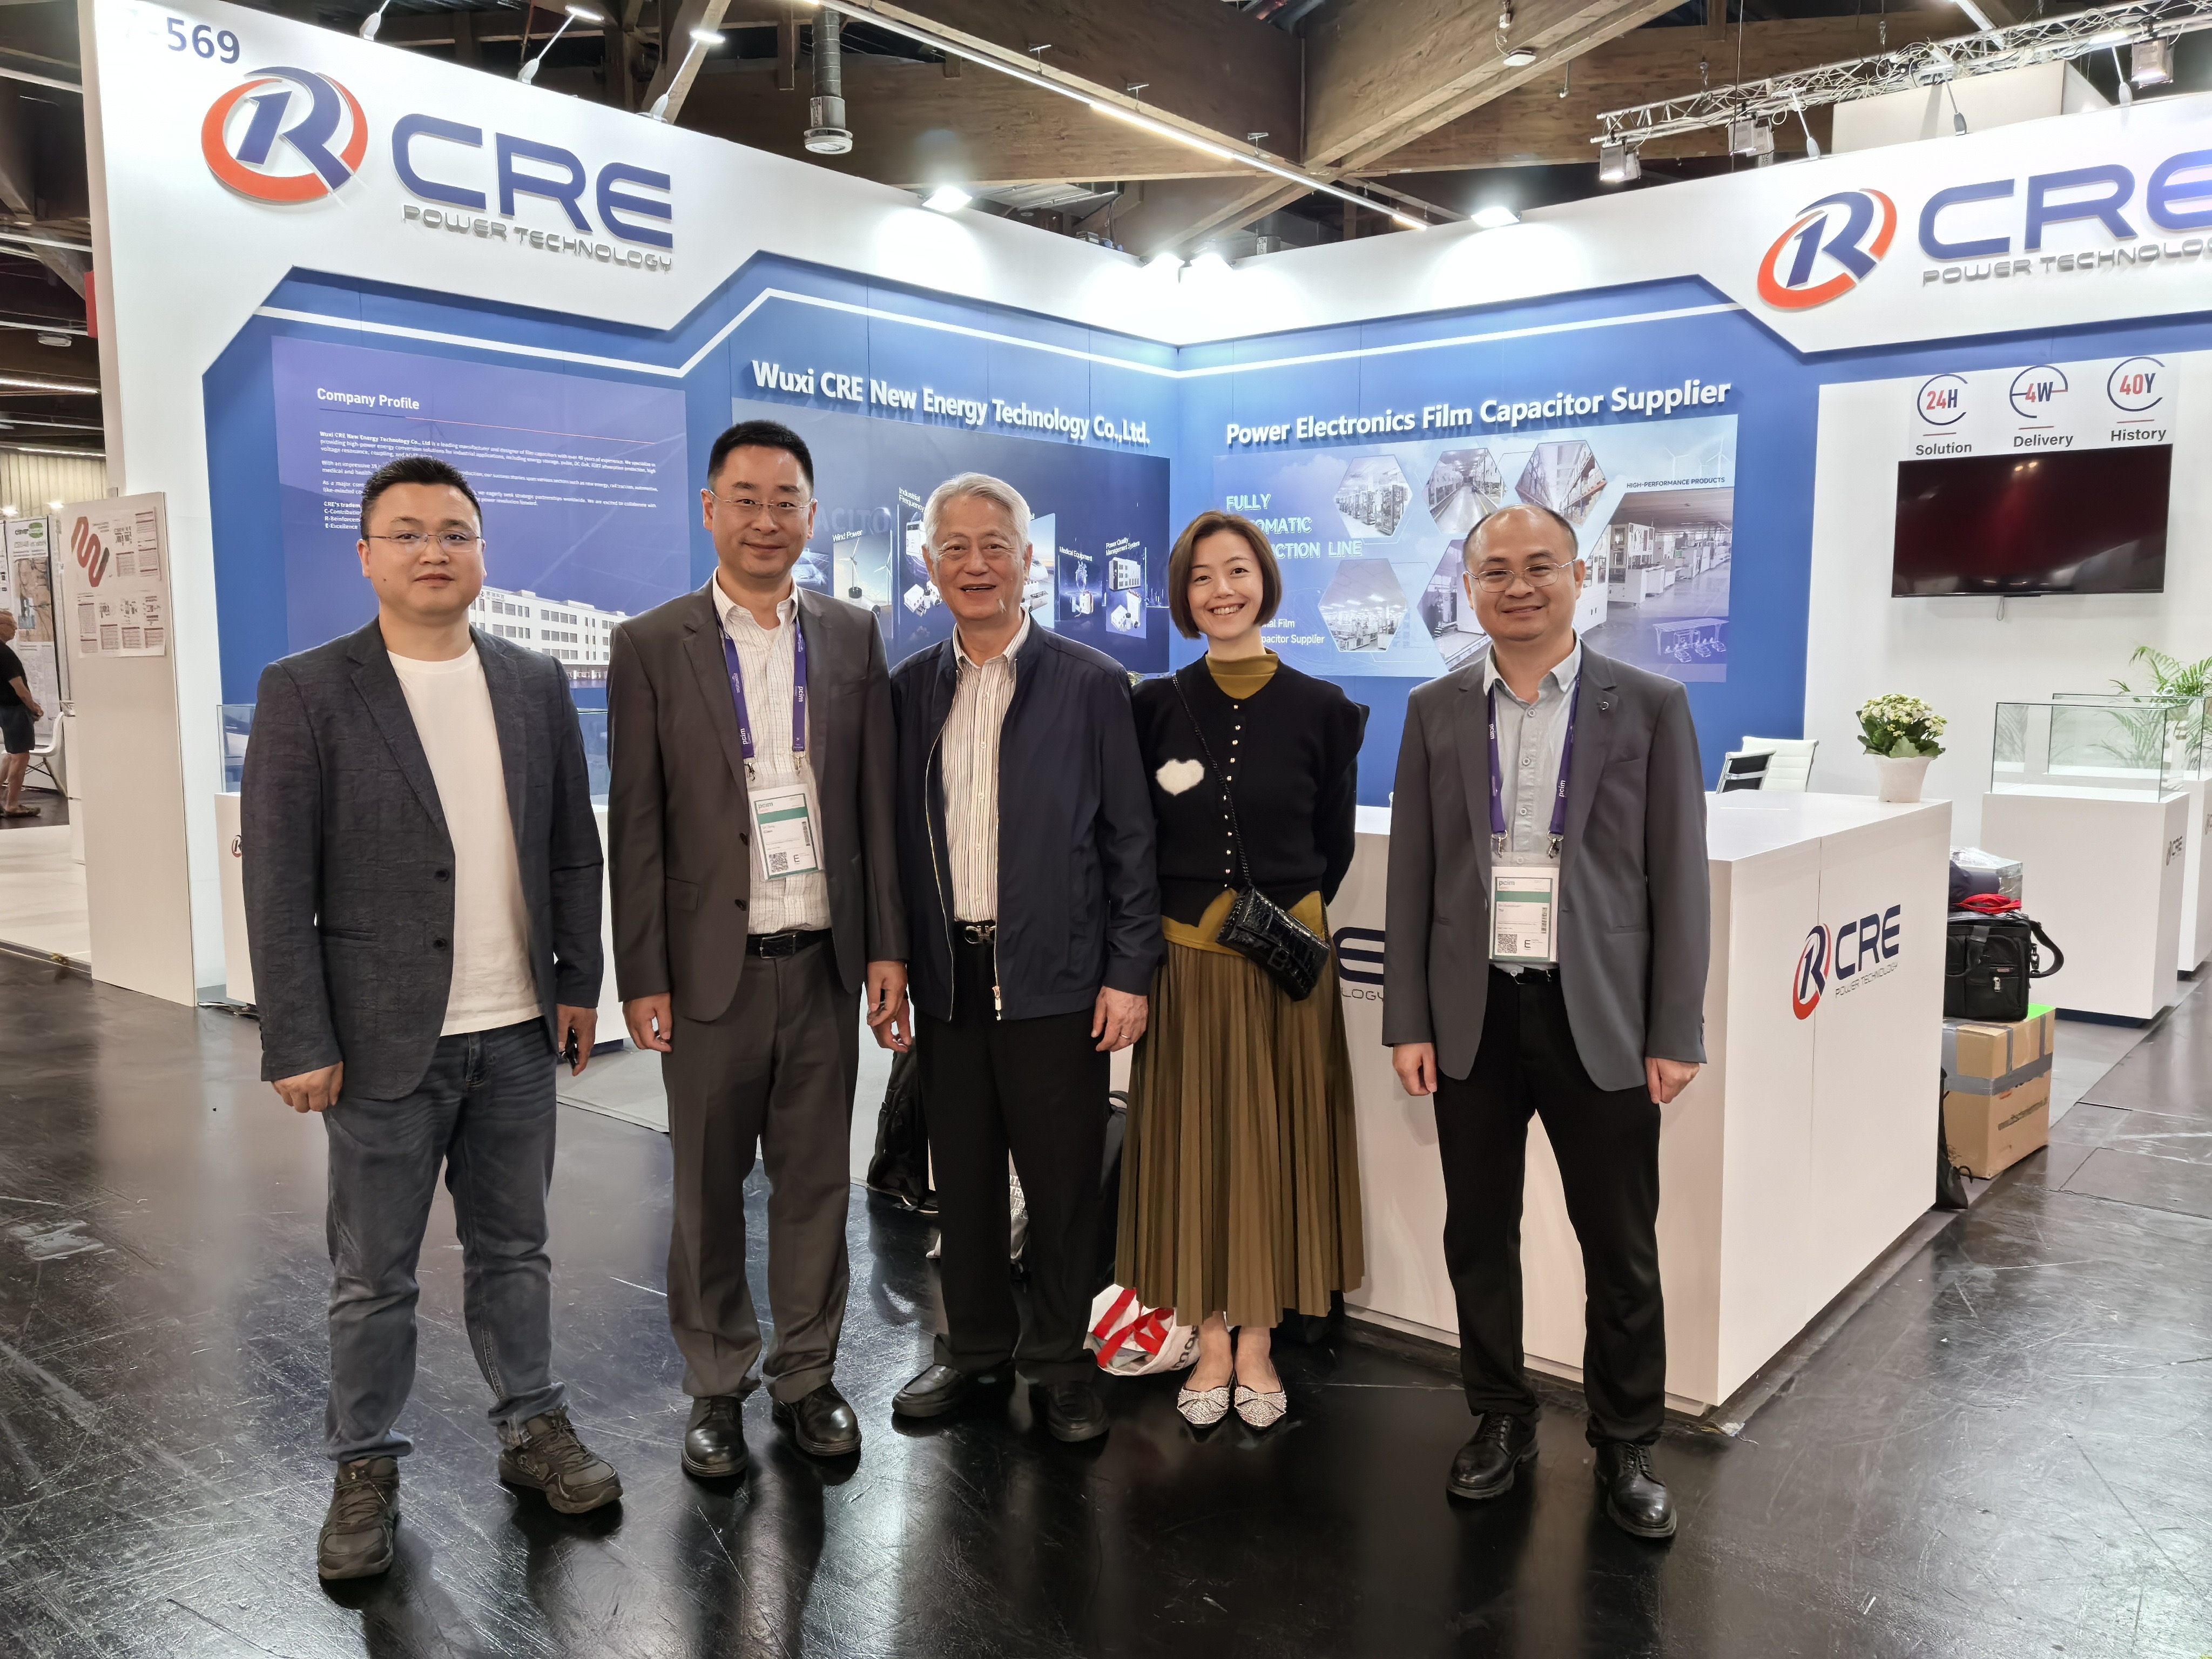 CRE attended the PCIM exhibition in Nuremberg Germany